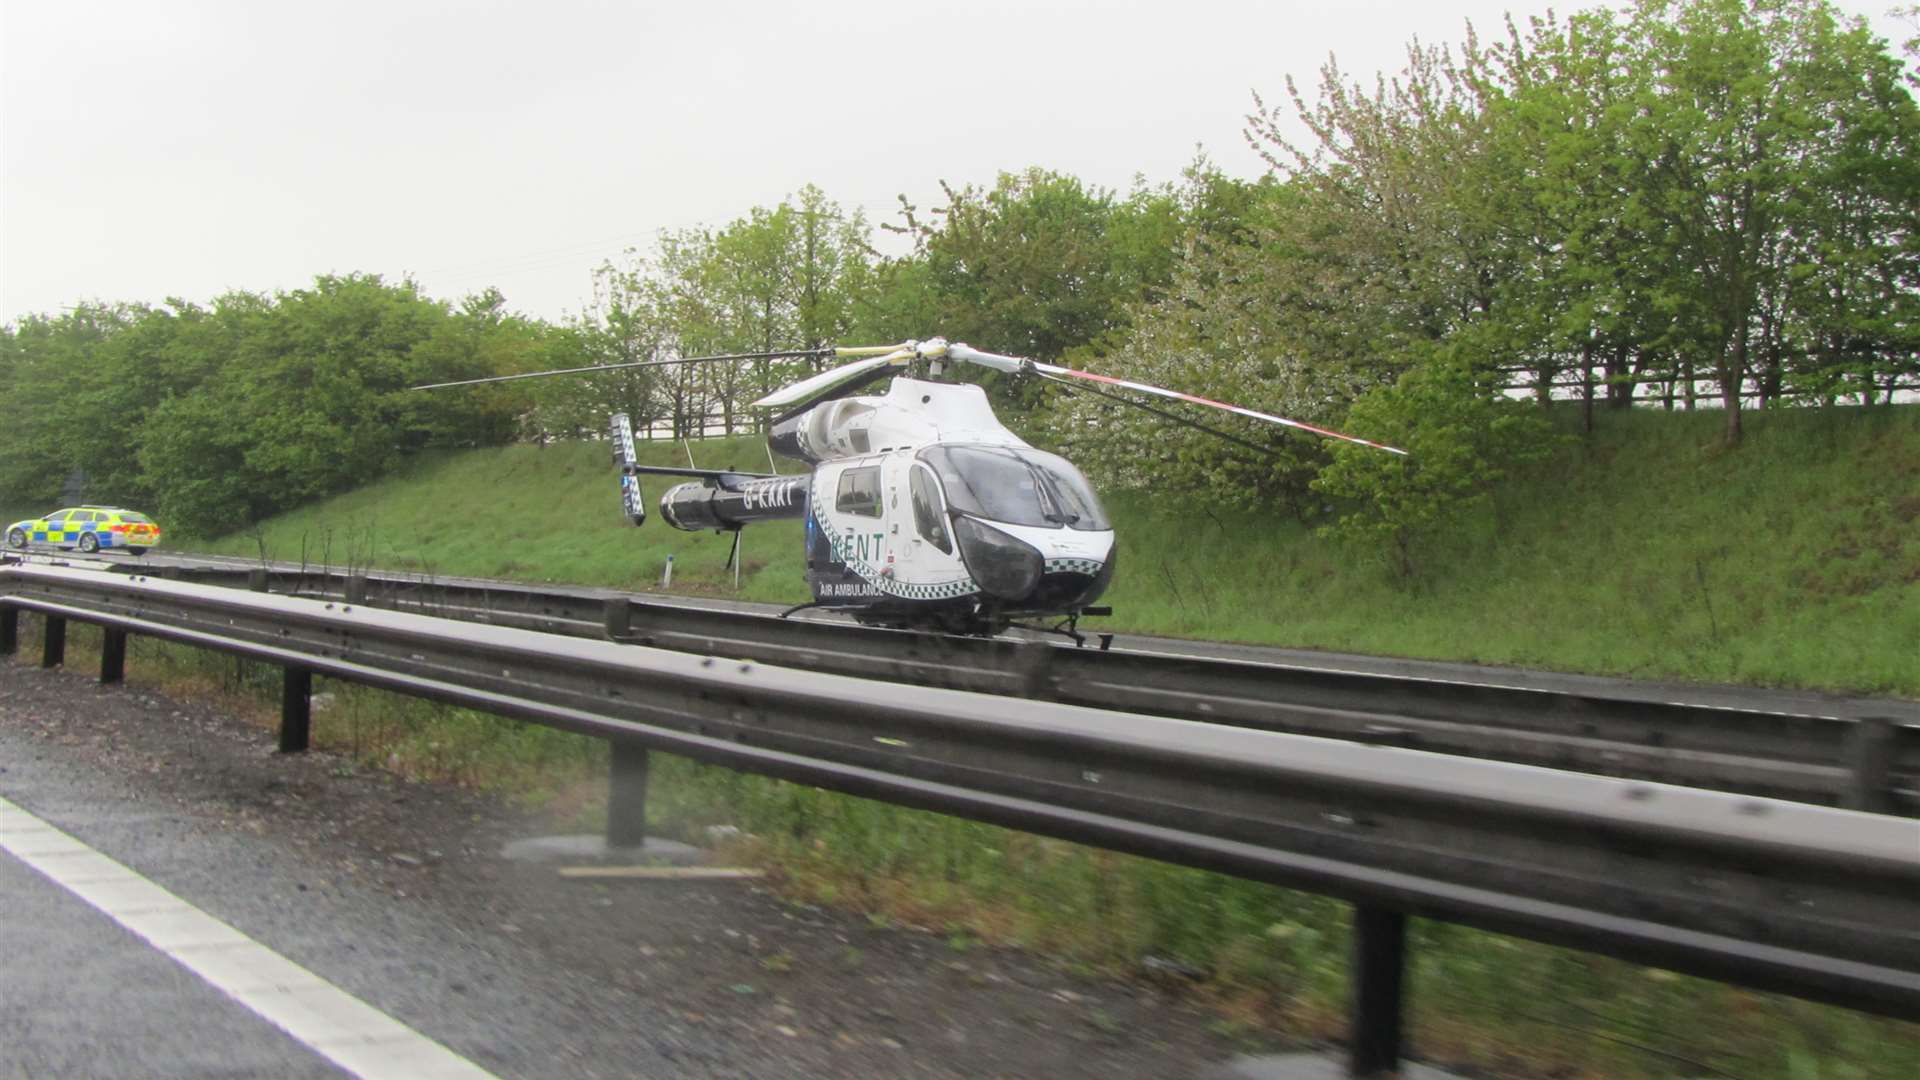 Kent Air Ambulance landed on the M2 London bound this morning